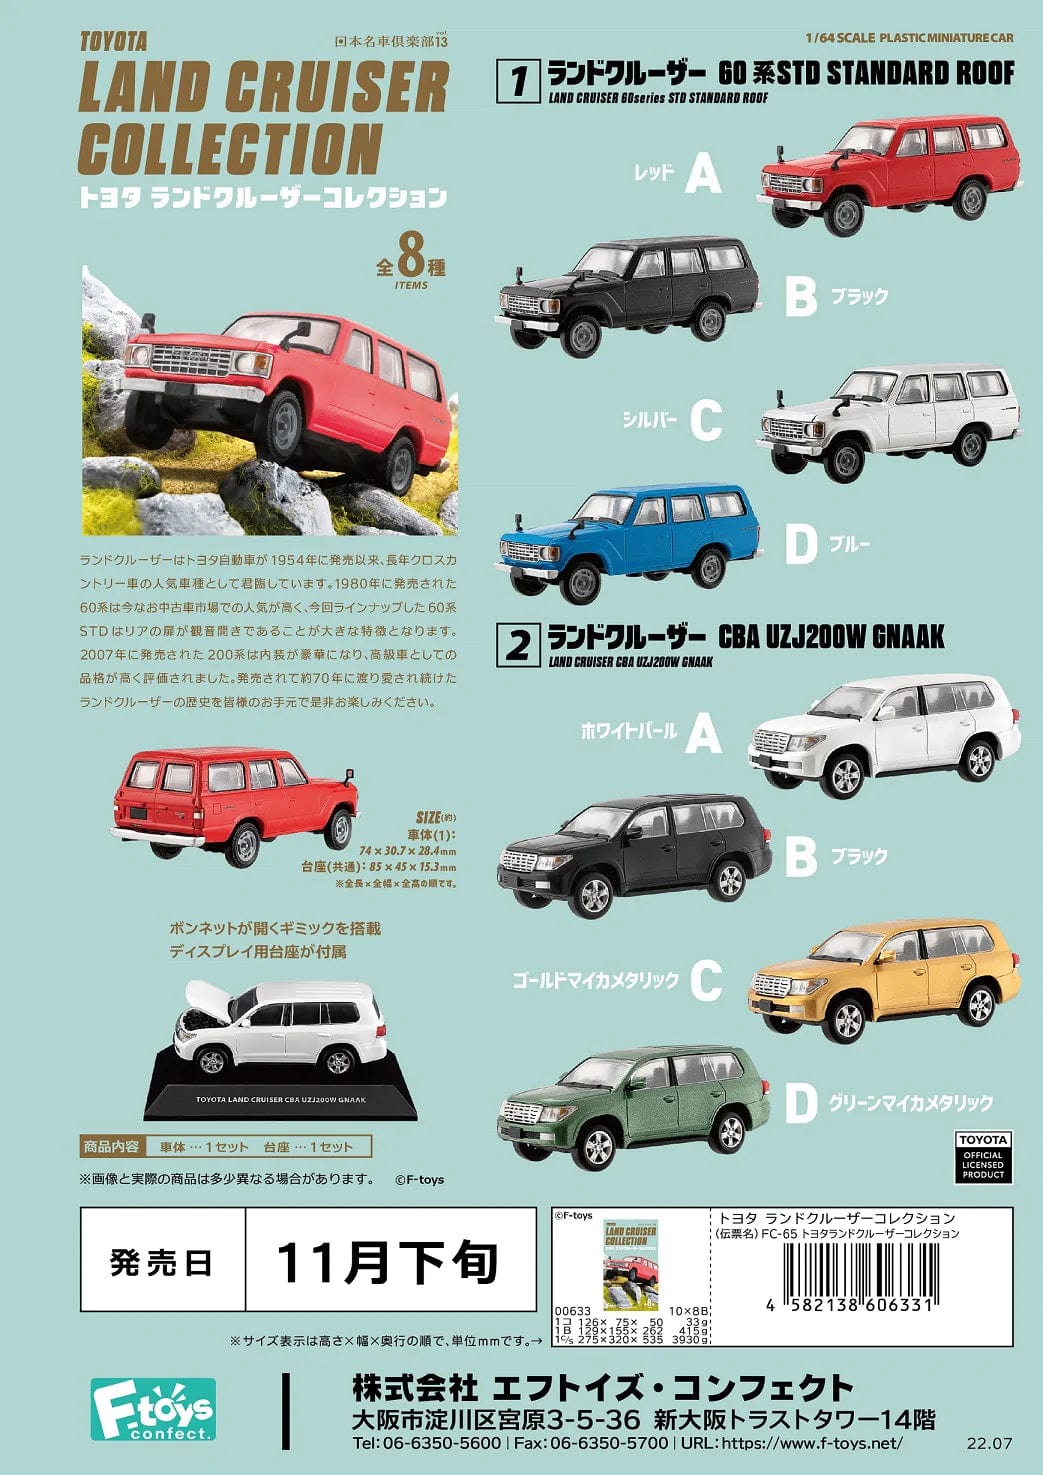 F-toys confect TOYOTA LAND CRUISER COLLECTION